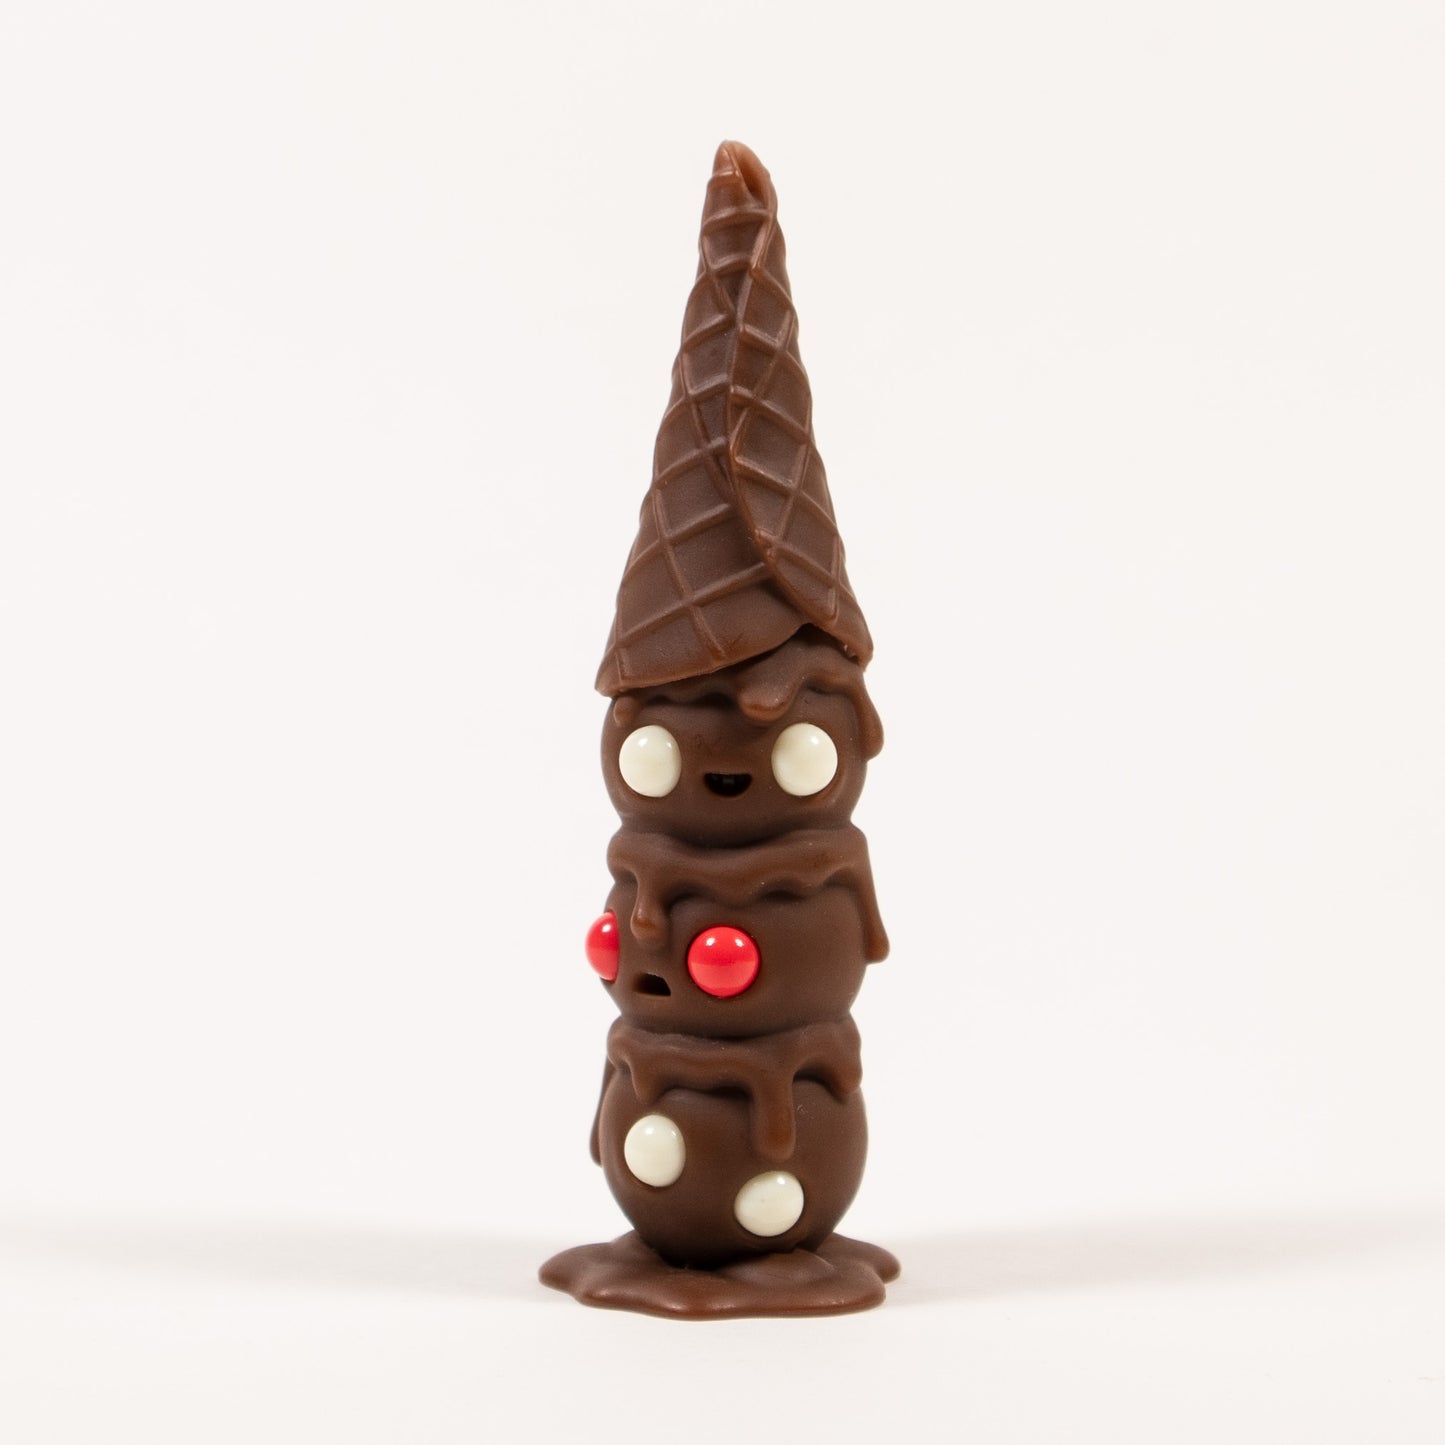 This is Wafull Nearly Neapolitan (Chocolate) Limited Edition Resin Figure